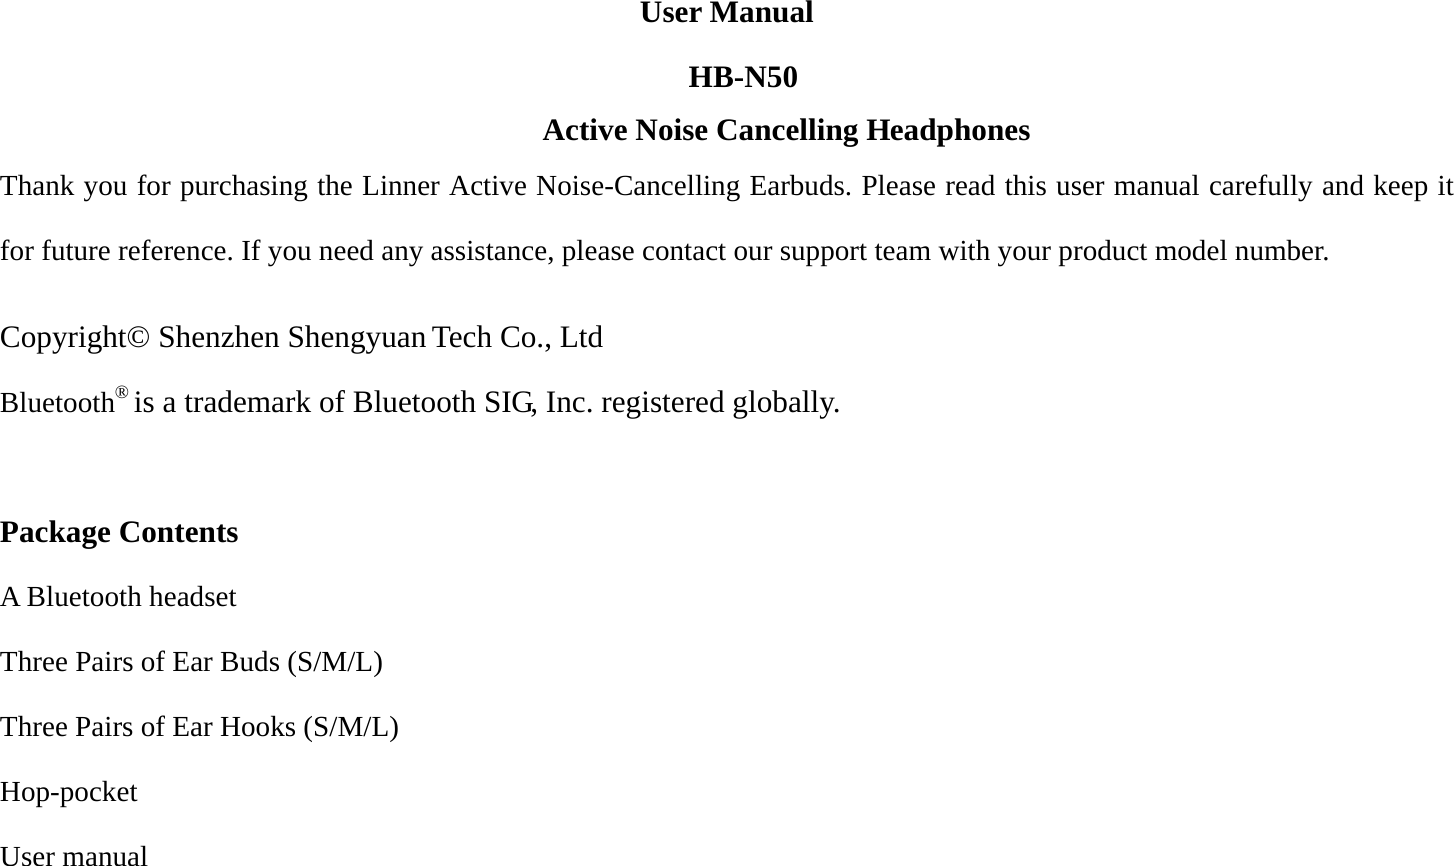 N50 User Manual HB-   Thank you for purchasing the Linner Active Noise-Cancelling Earbuds. Please read this user manual carefully and keep it for future reference. If you need any assistance, please contact our support team with your product model number.    Copyright© Shenzhen Shengyuan Tech Co., Ltd Bluetooth® is a trademark of Bluetooth SIG, Inc. registered globally.  Package Contents A Bluetooth headset Three Pairs of Ear Buds (S/M/L) Three Pairs of Ear Hooks (S/M/L) Hop-pocket User manual  Active Noise Cancelling H   eadphones 